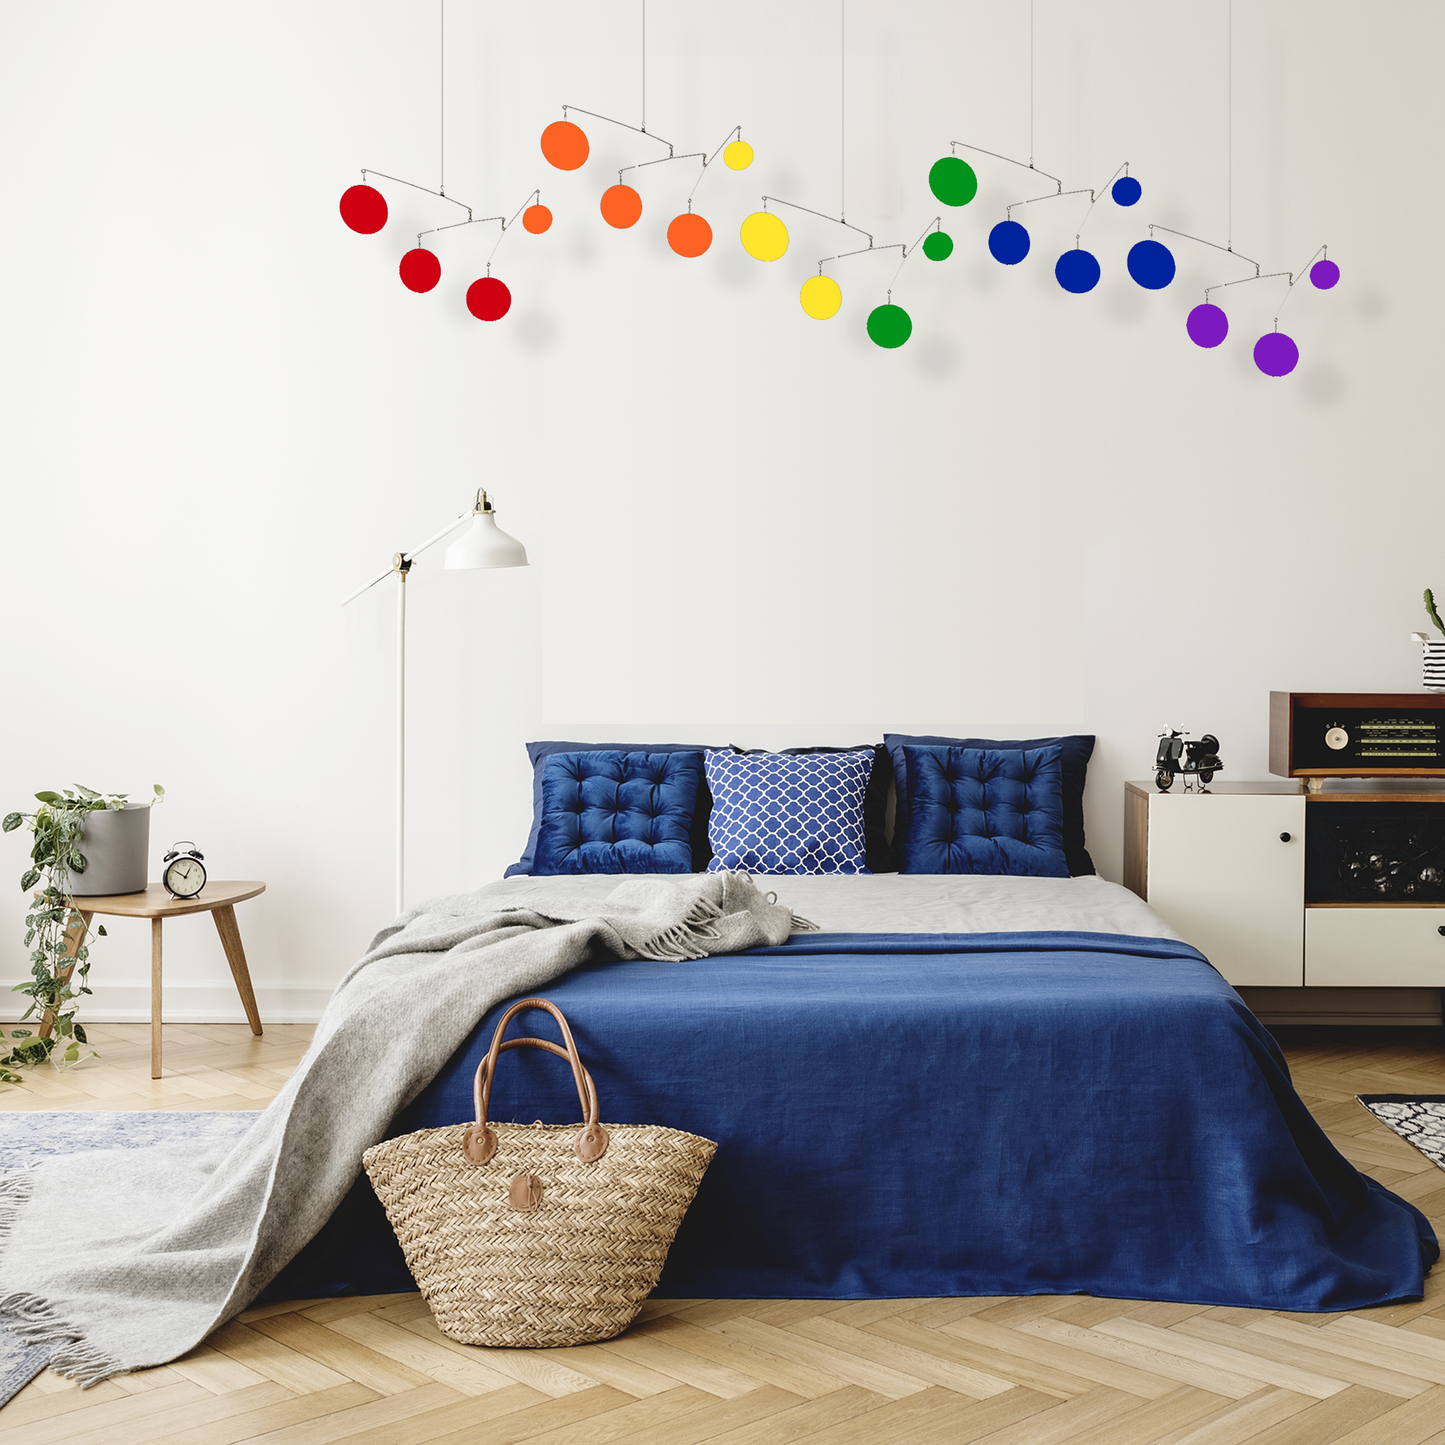 The Atomic Mobile in bedroom with navy blue comforter and pillows with wood floor - Exclusive Rainbow Pride LGBTQ+ Colors by AtomicMobiles.com - Love is Love